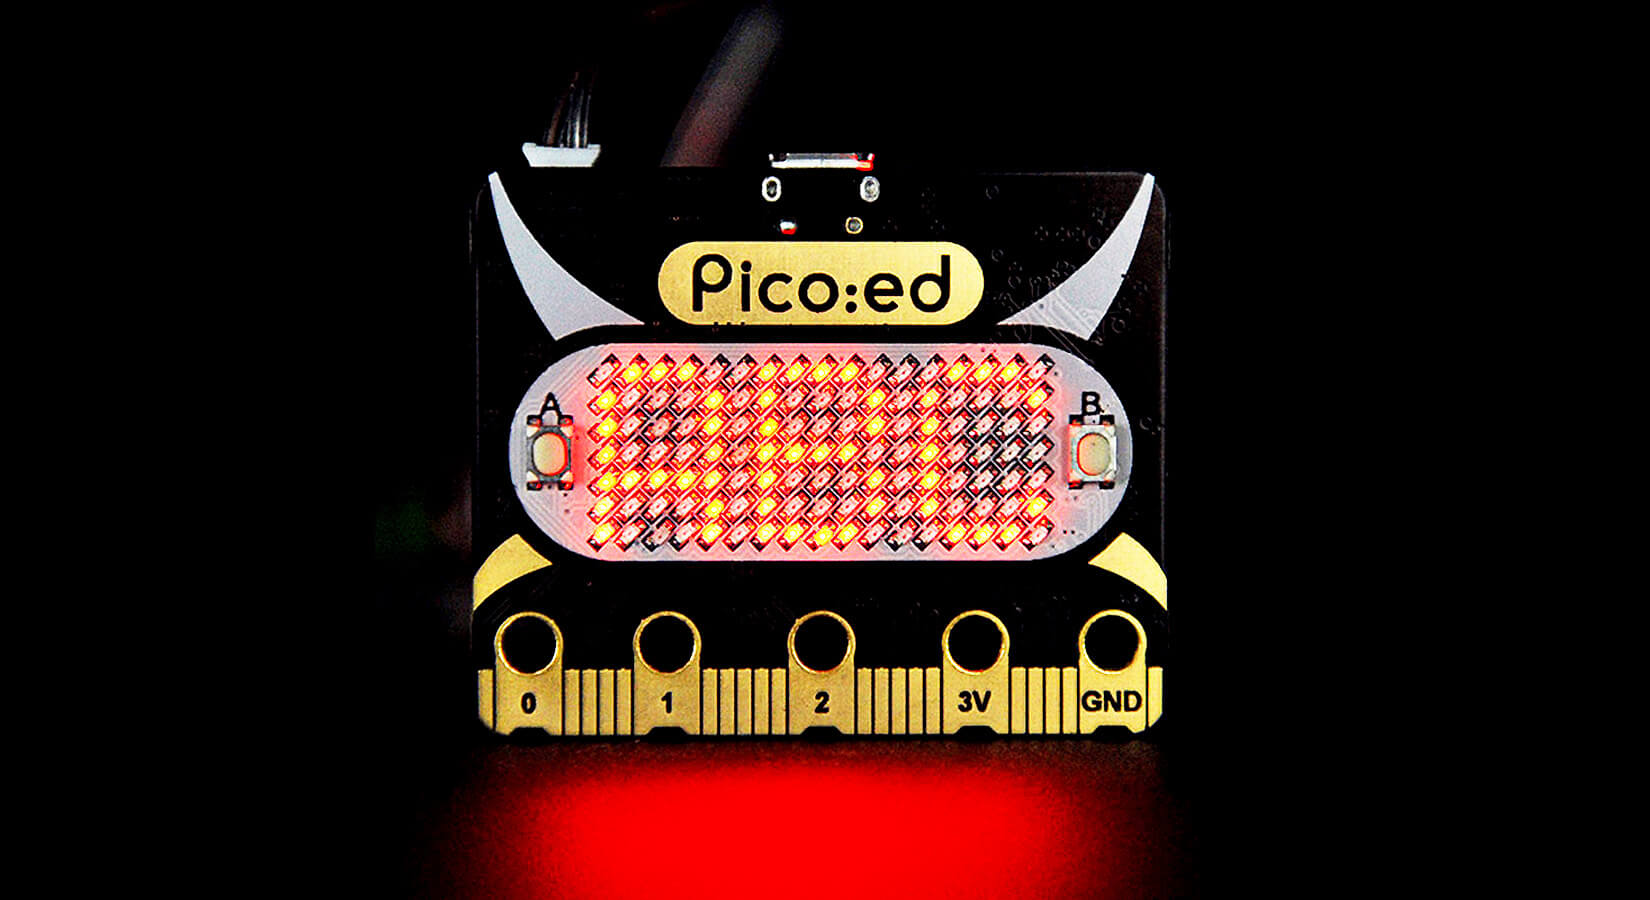 Getting started with the elecfreaks pico:ed